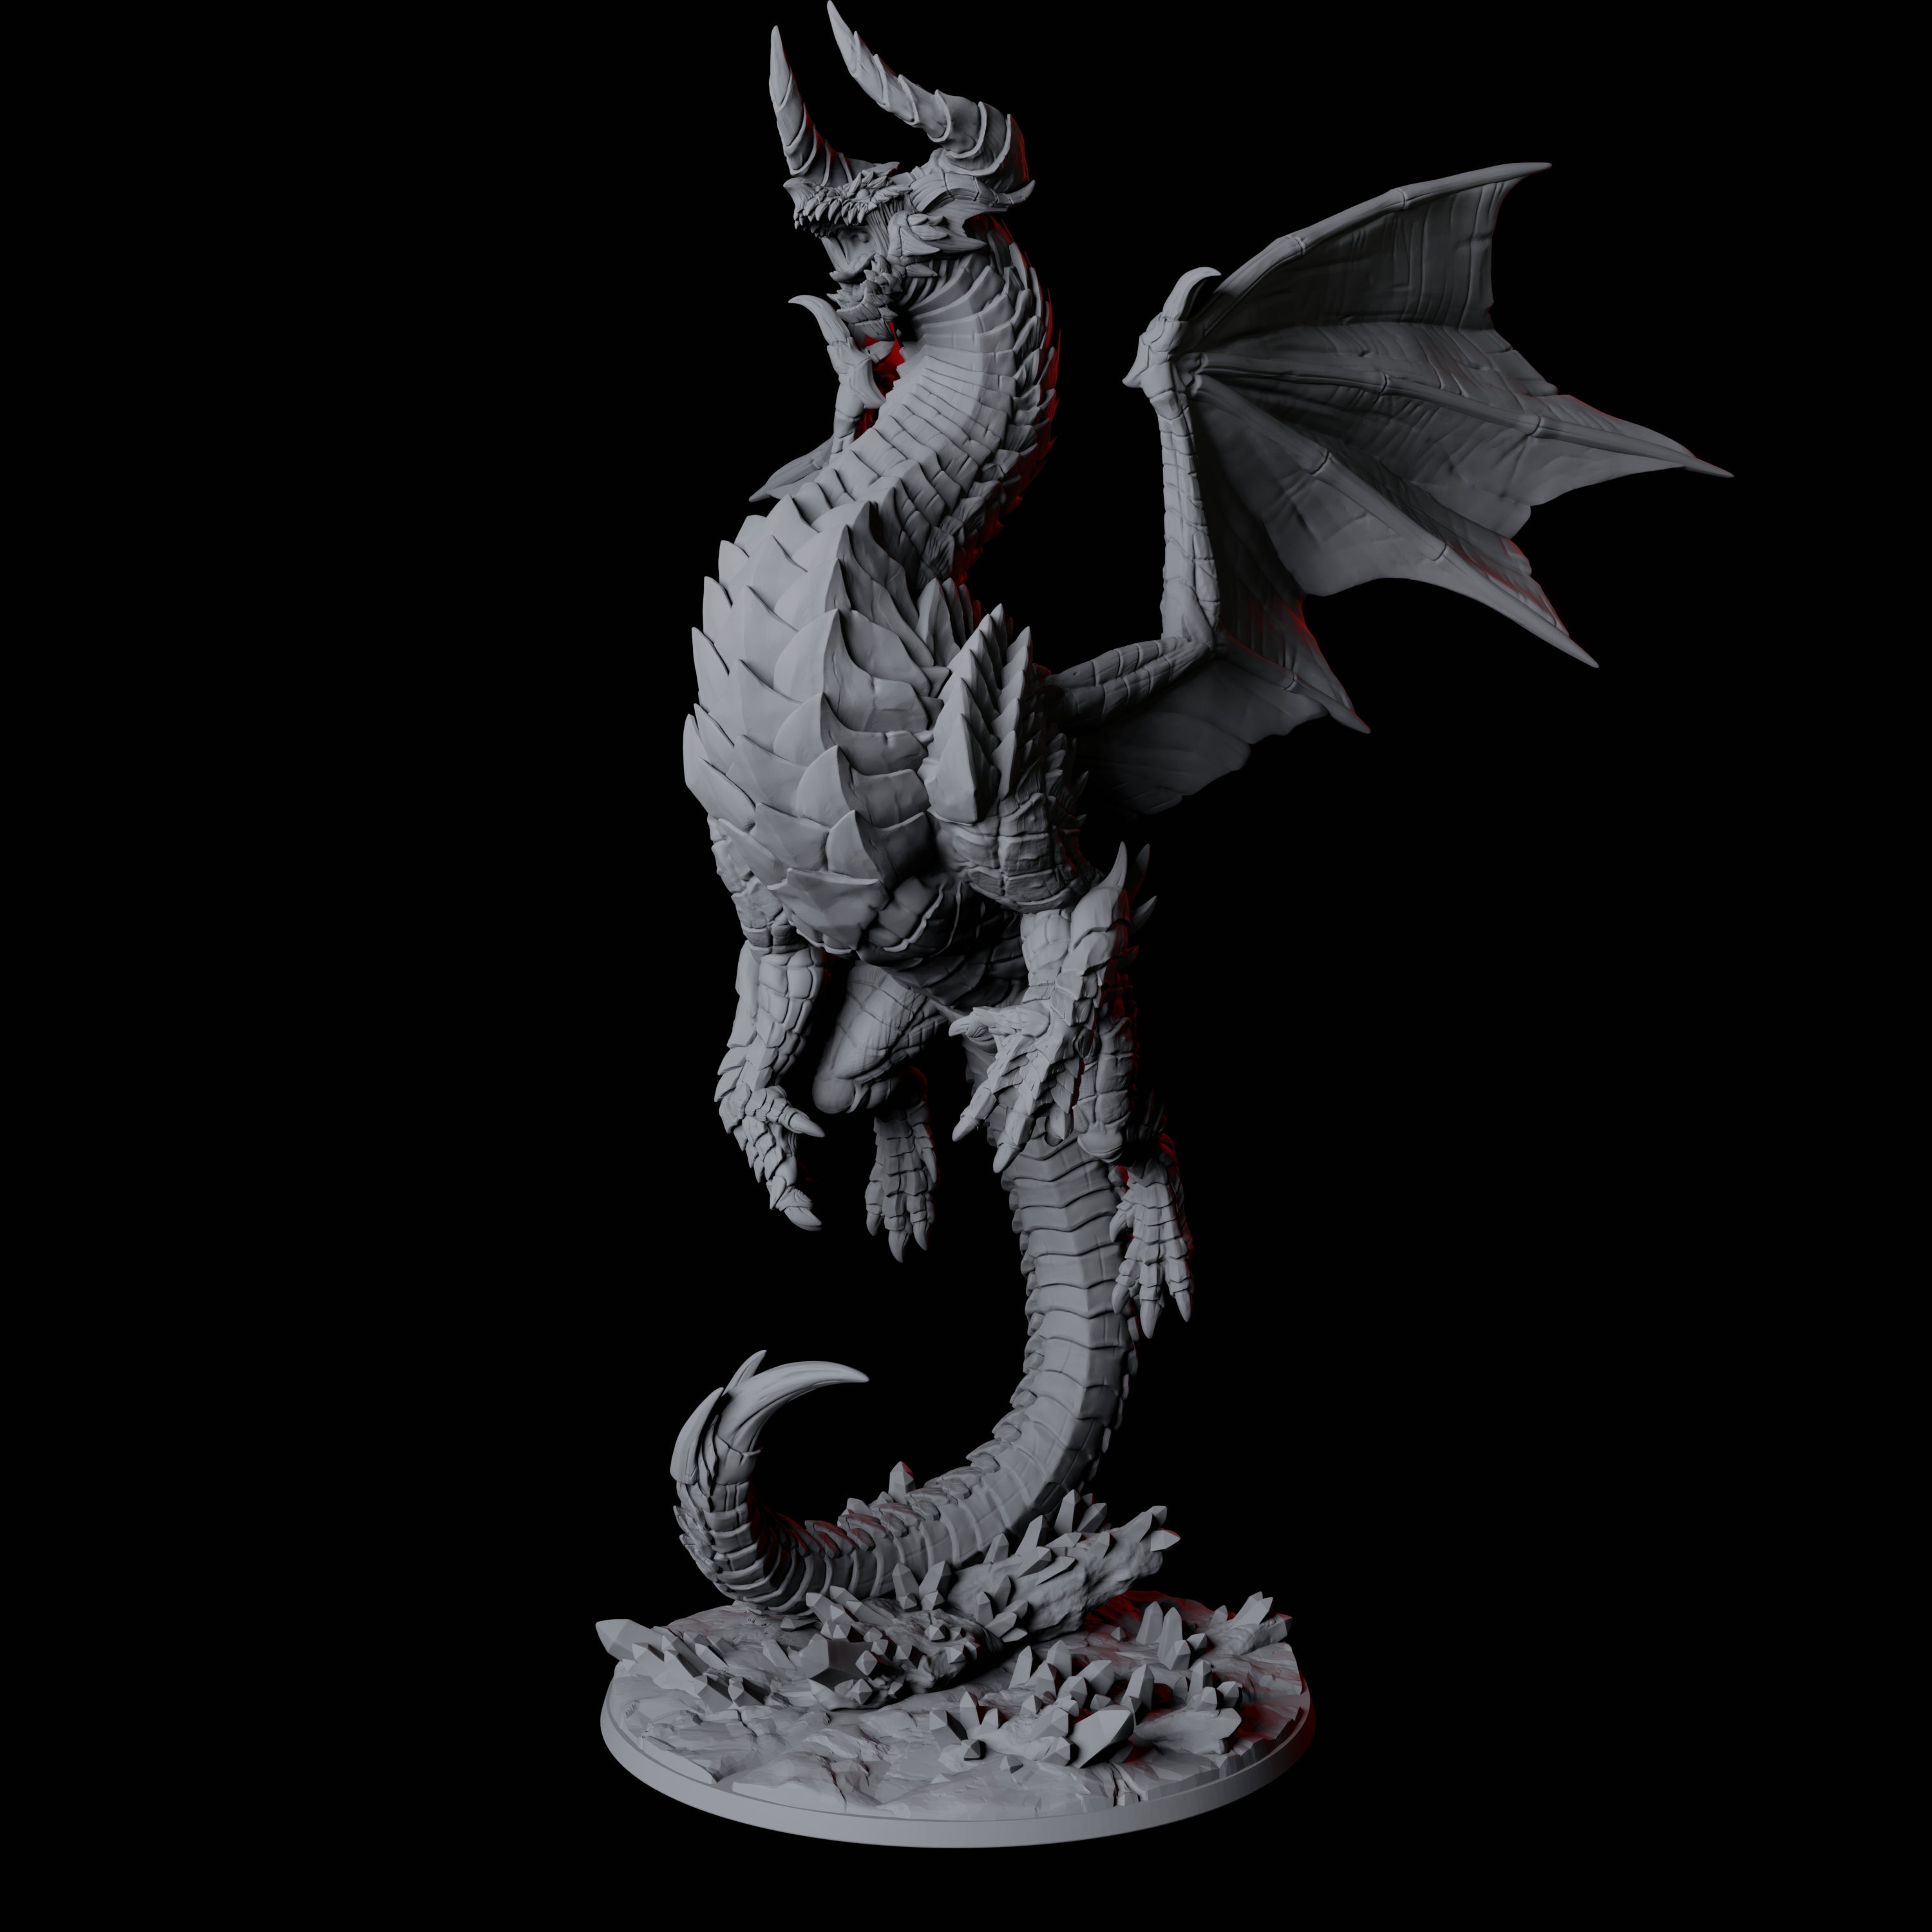 Terrifying Red Dragon Miniature for Dungeons and Dragons, Pathfinder or other TTRPGs